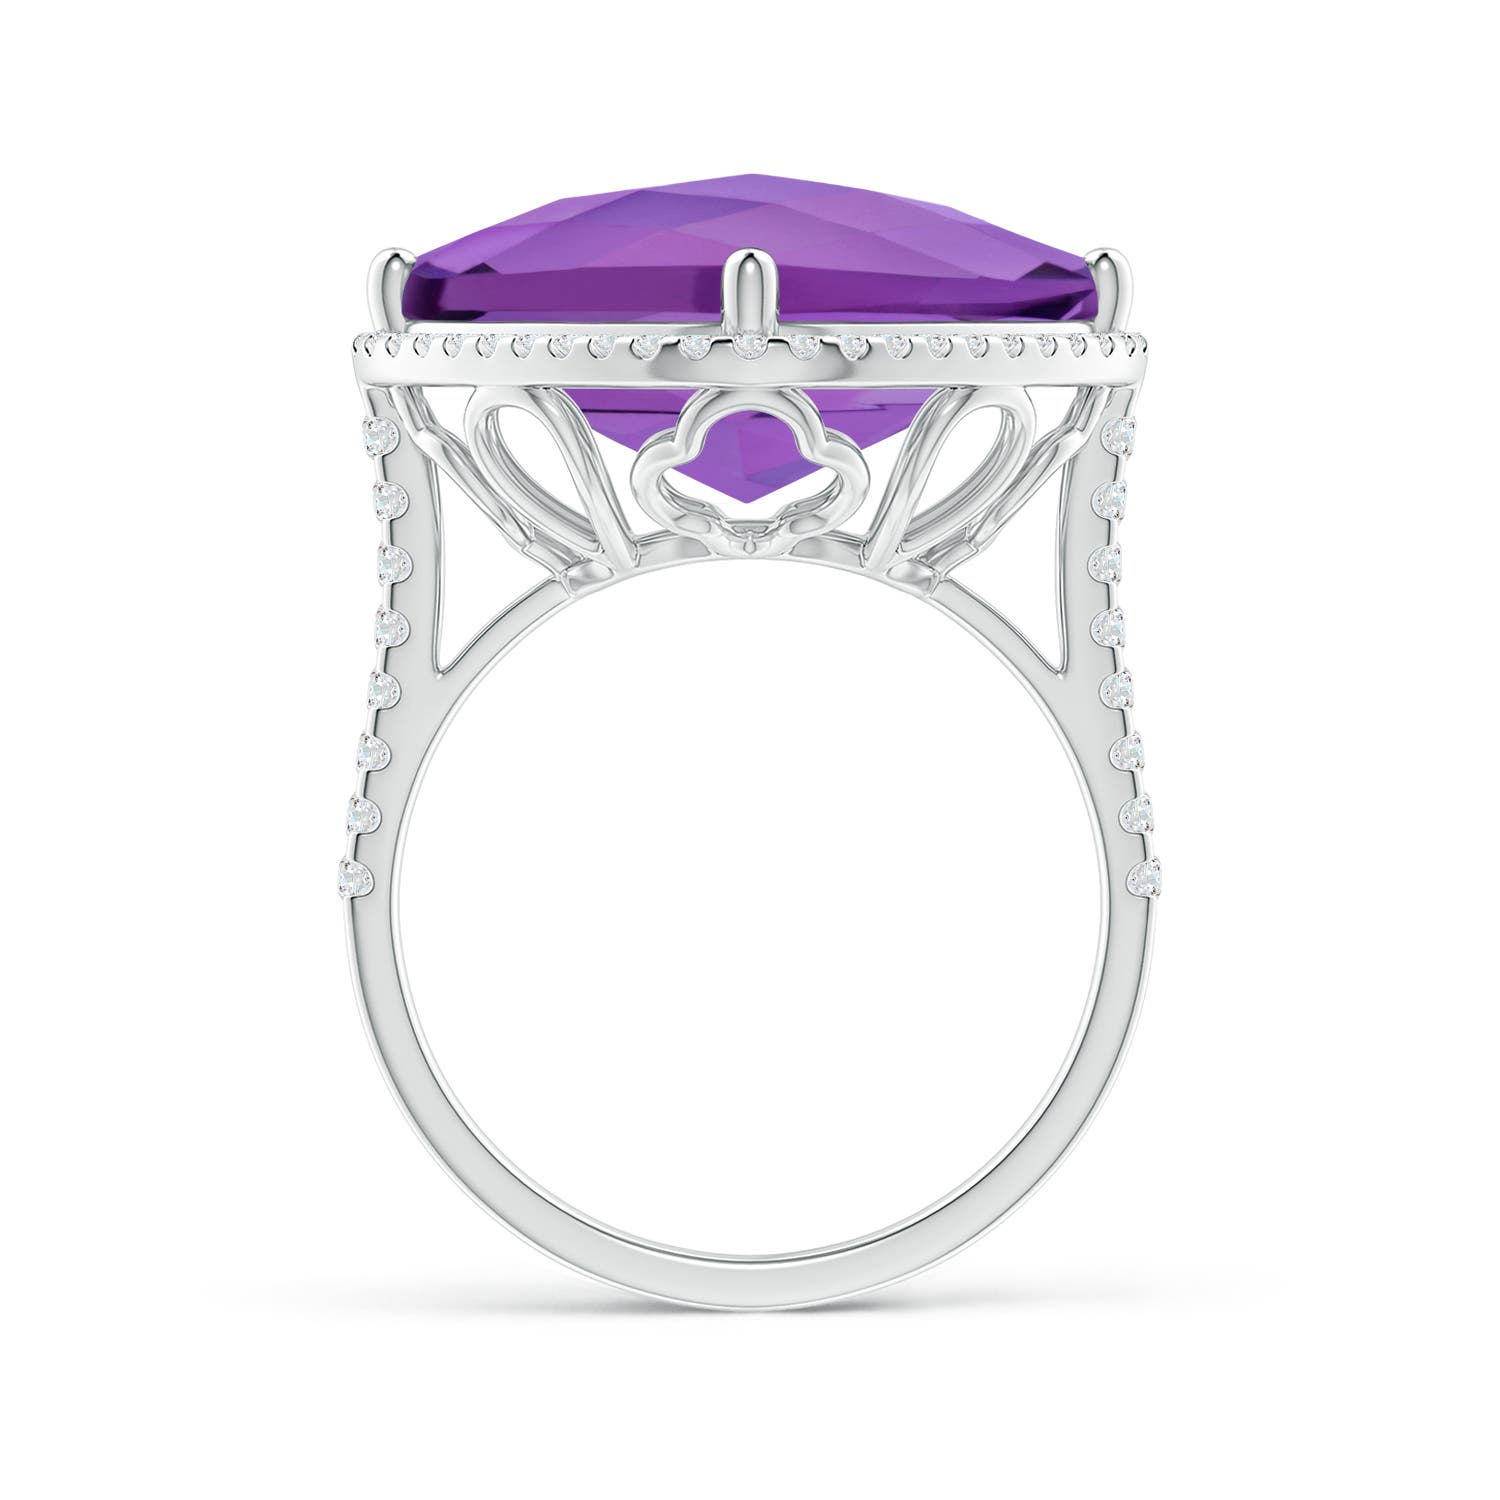 AA - Amethyst / 13.89 CT / 14 KT White Gold